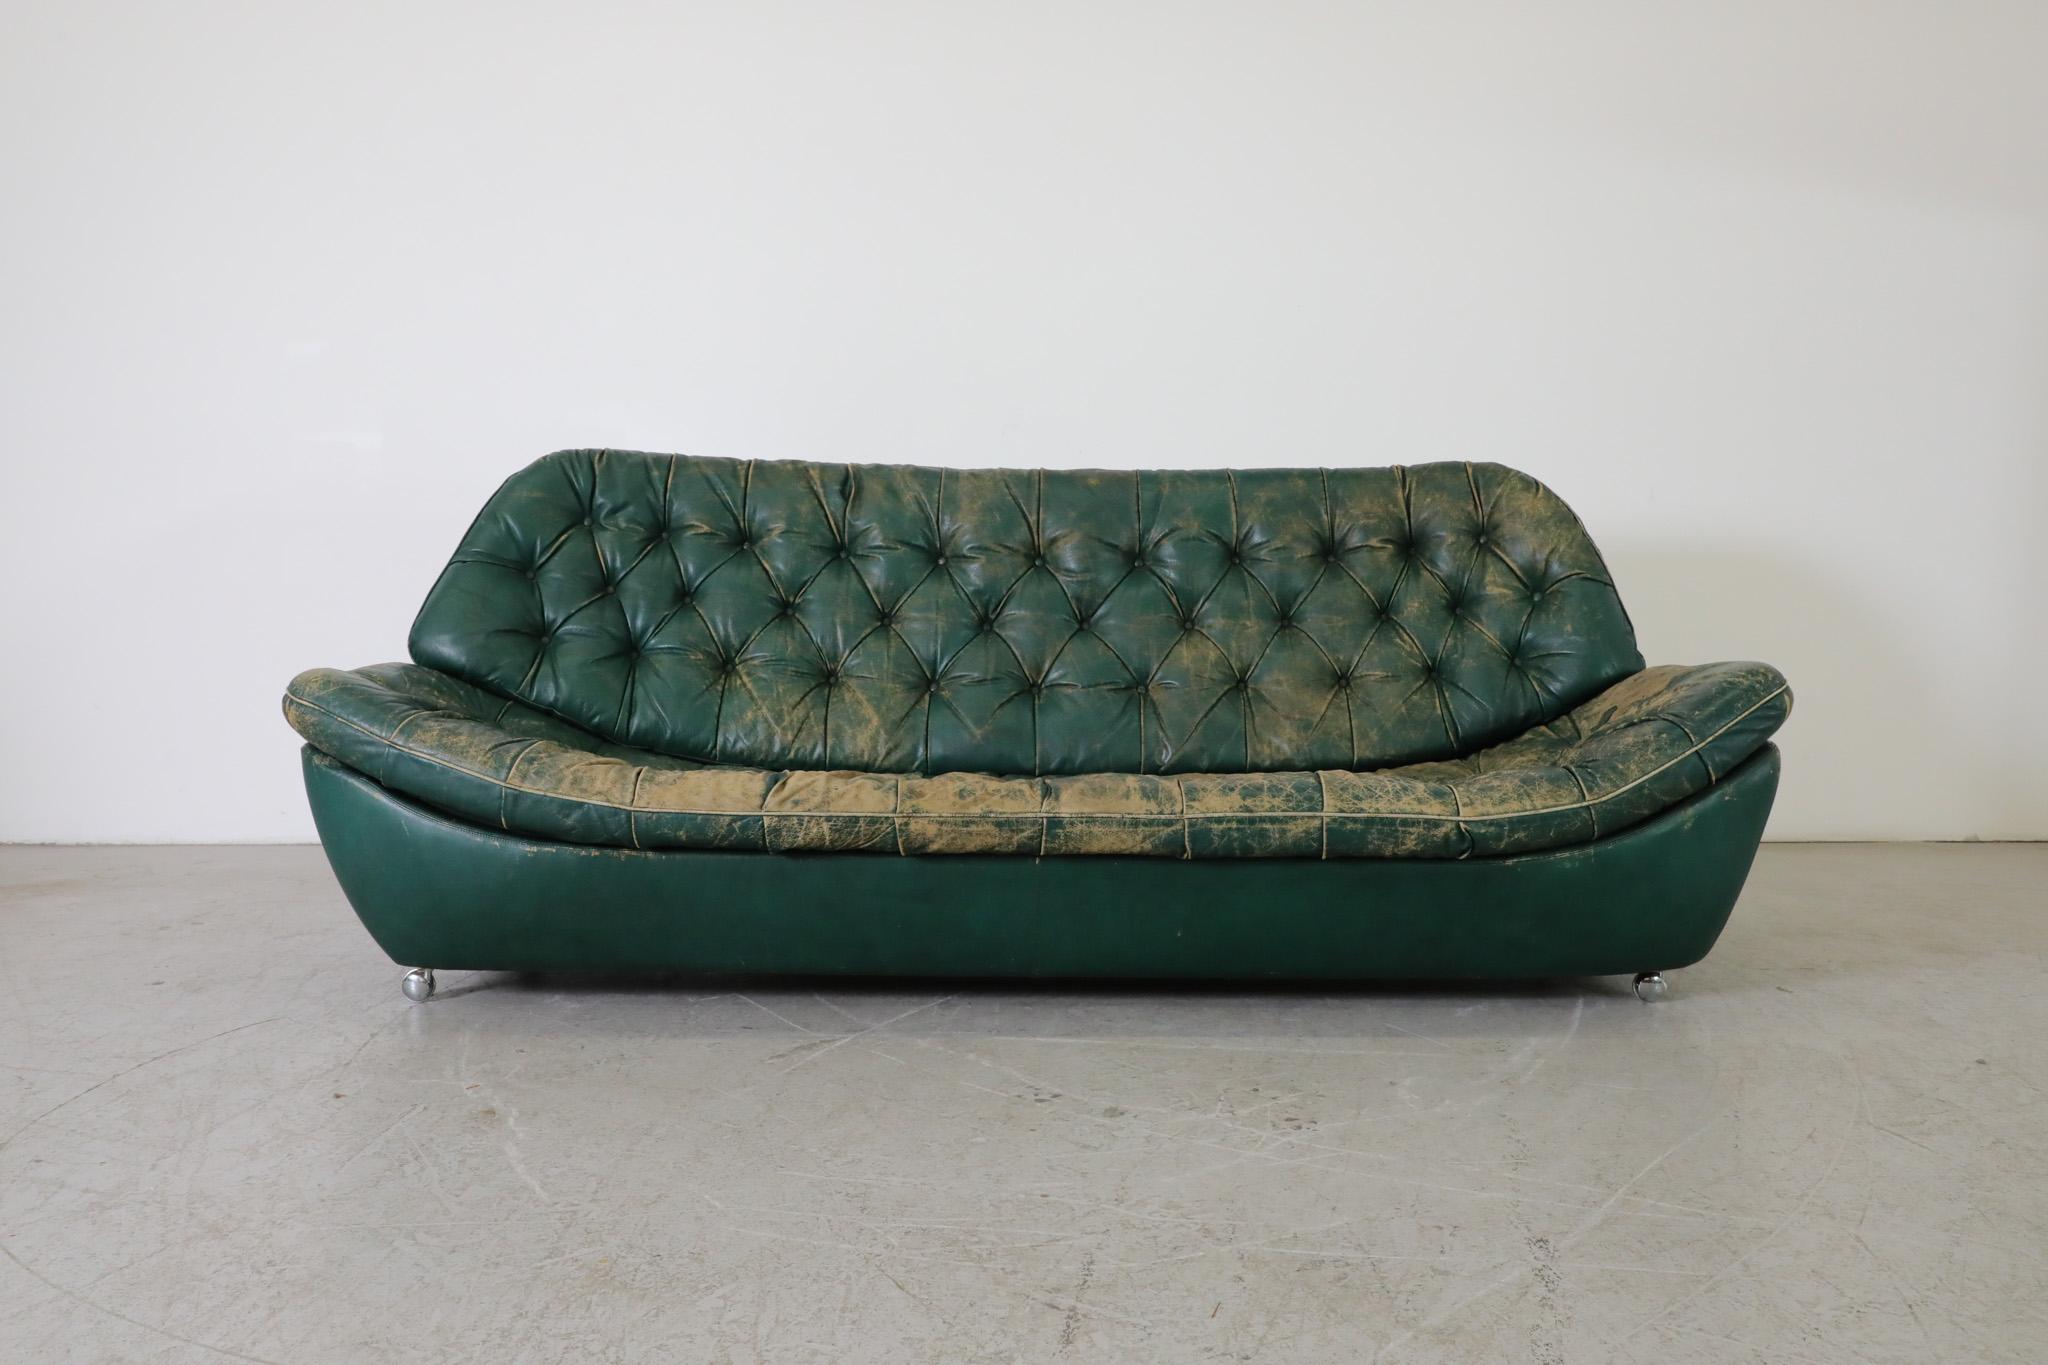 Vintage Artifort style green tufted leather sofa. A Mid-Century Chesterfield! 
Green leather frame with matching tufted leather back and seat cushions on chrome wheels and short chrome feet with rounded wood tips. This well loved three seater sofa